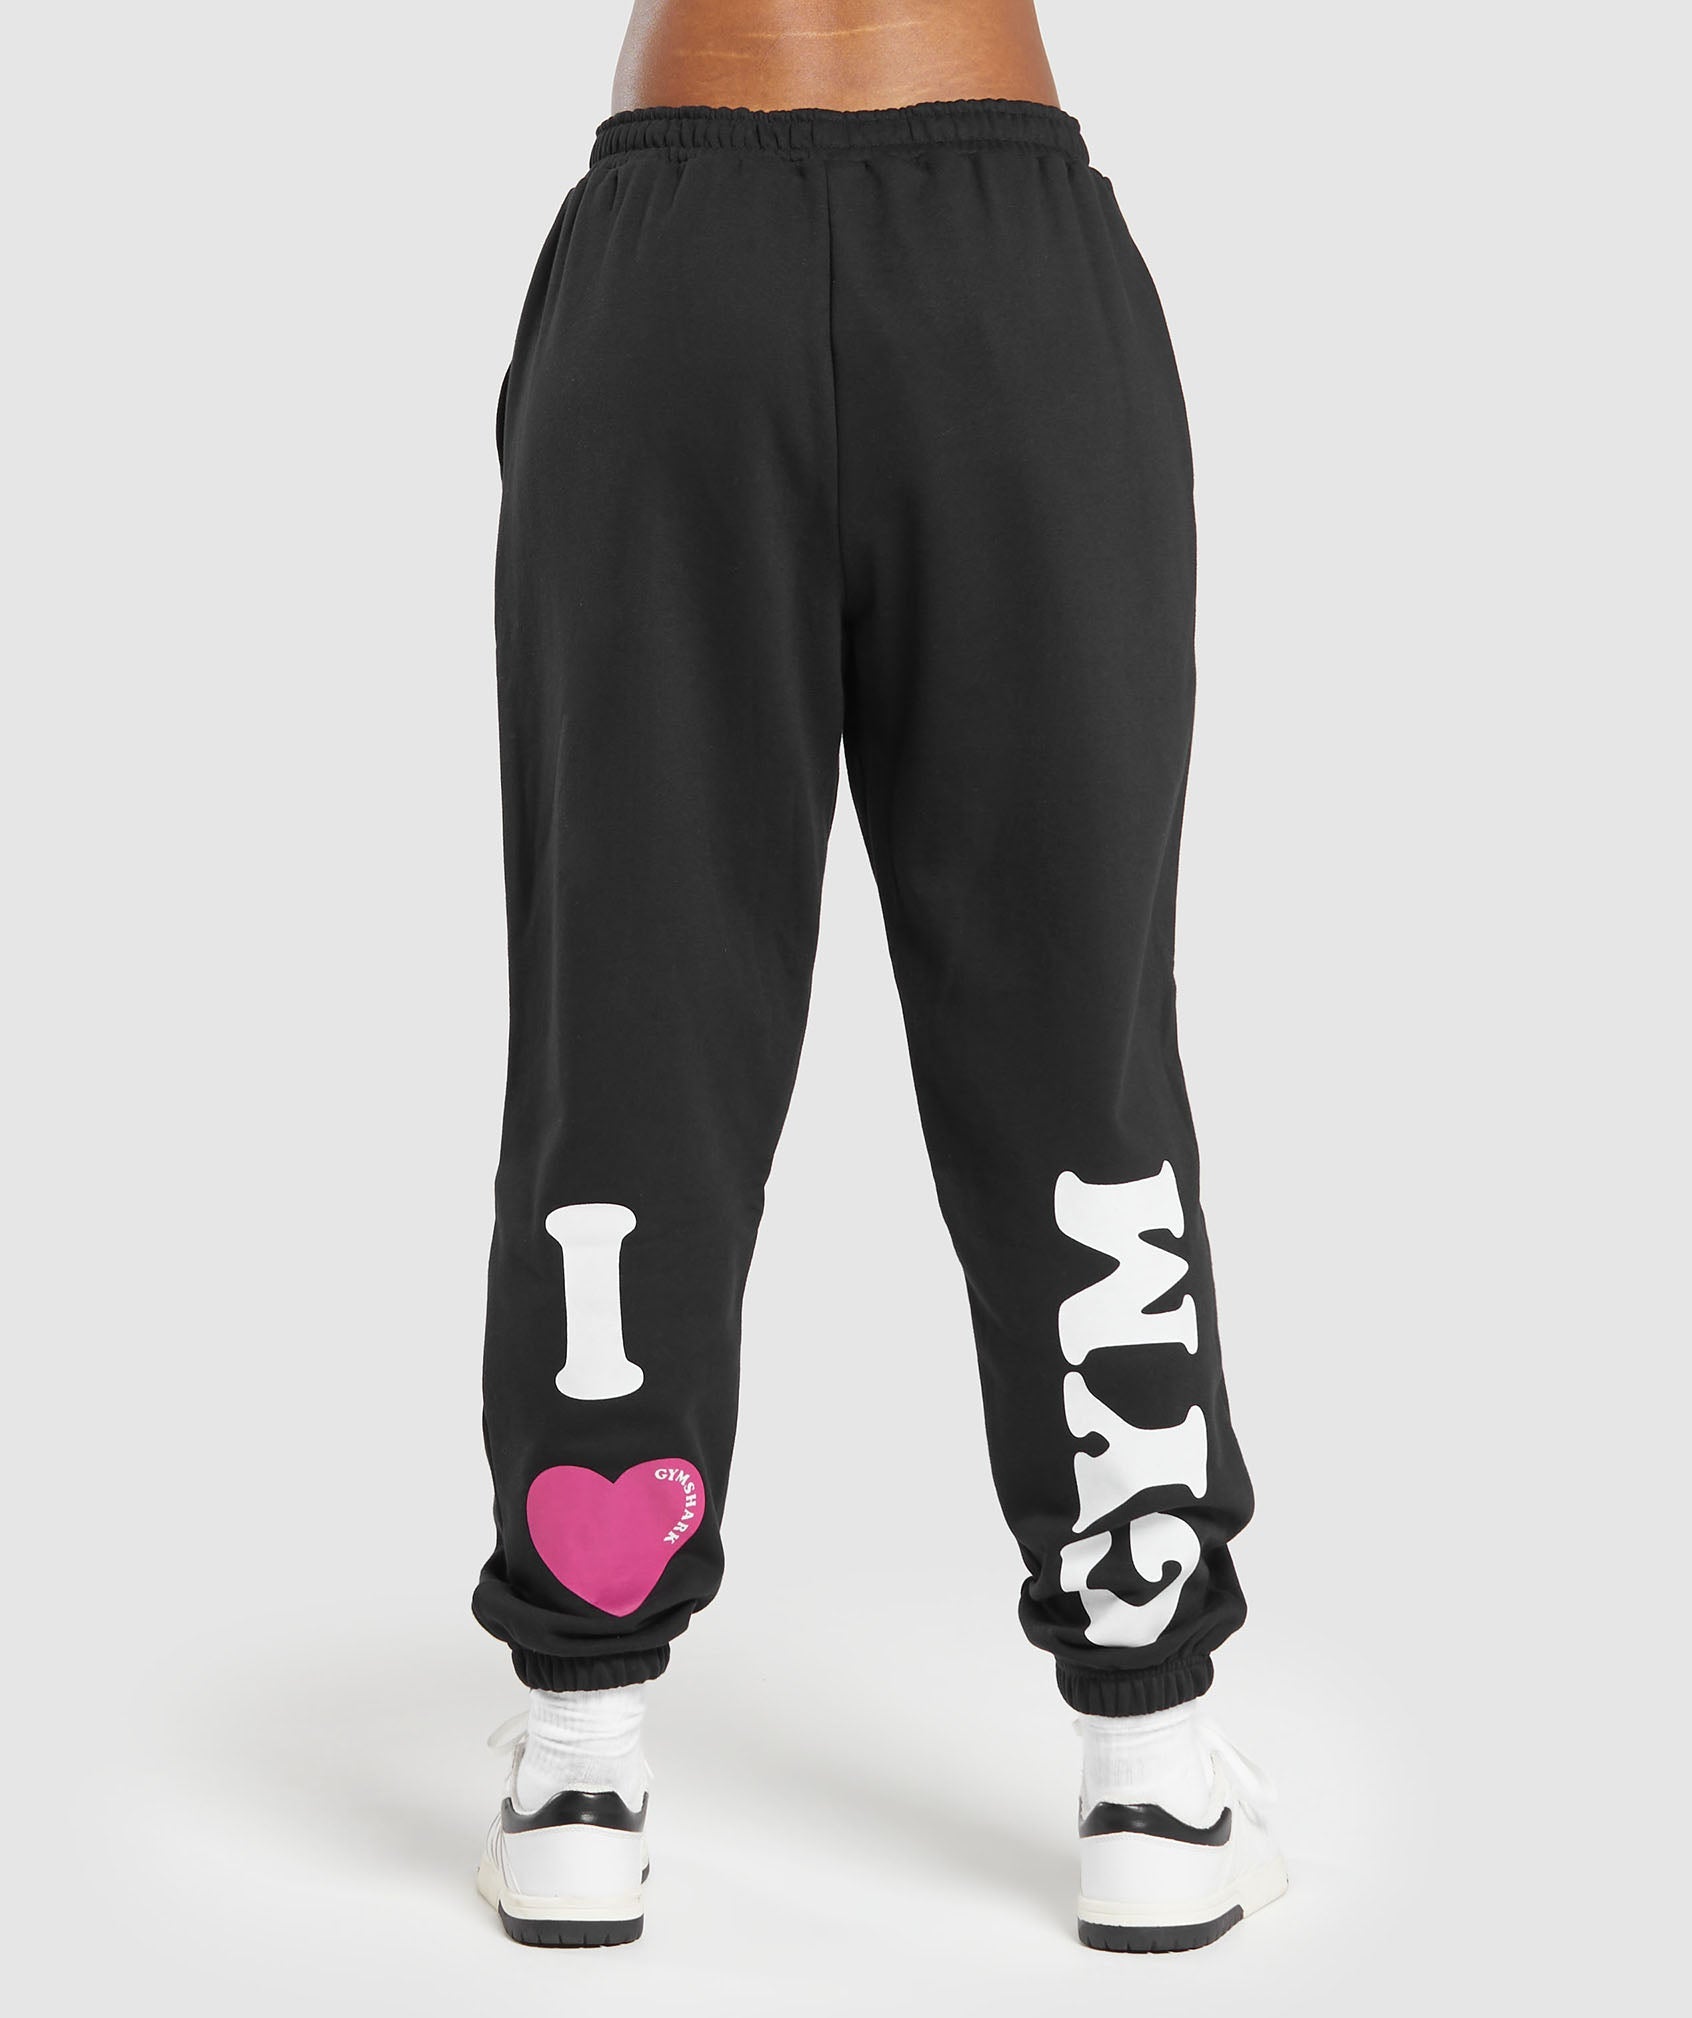 Women Tracksuit, Fitness Outfit, Sweatpants Set, Women Joggers Outfit,  Women Sweatsuit, Workout Joggers, Gym Outfit, Anniversary Gift -  Canada